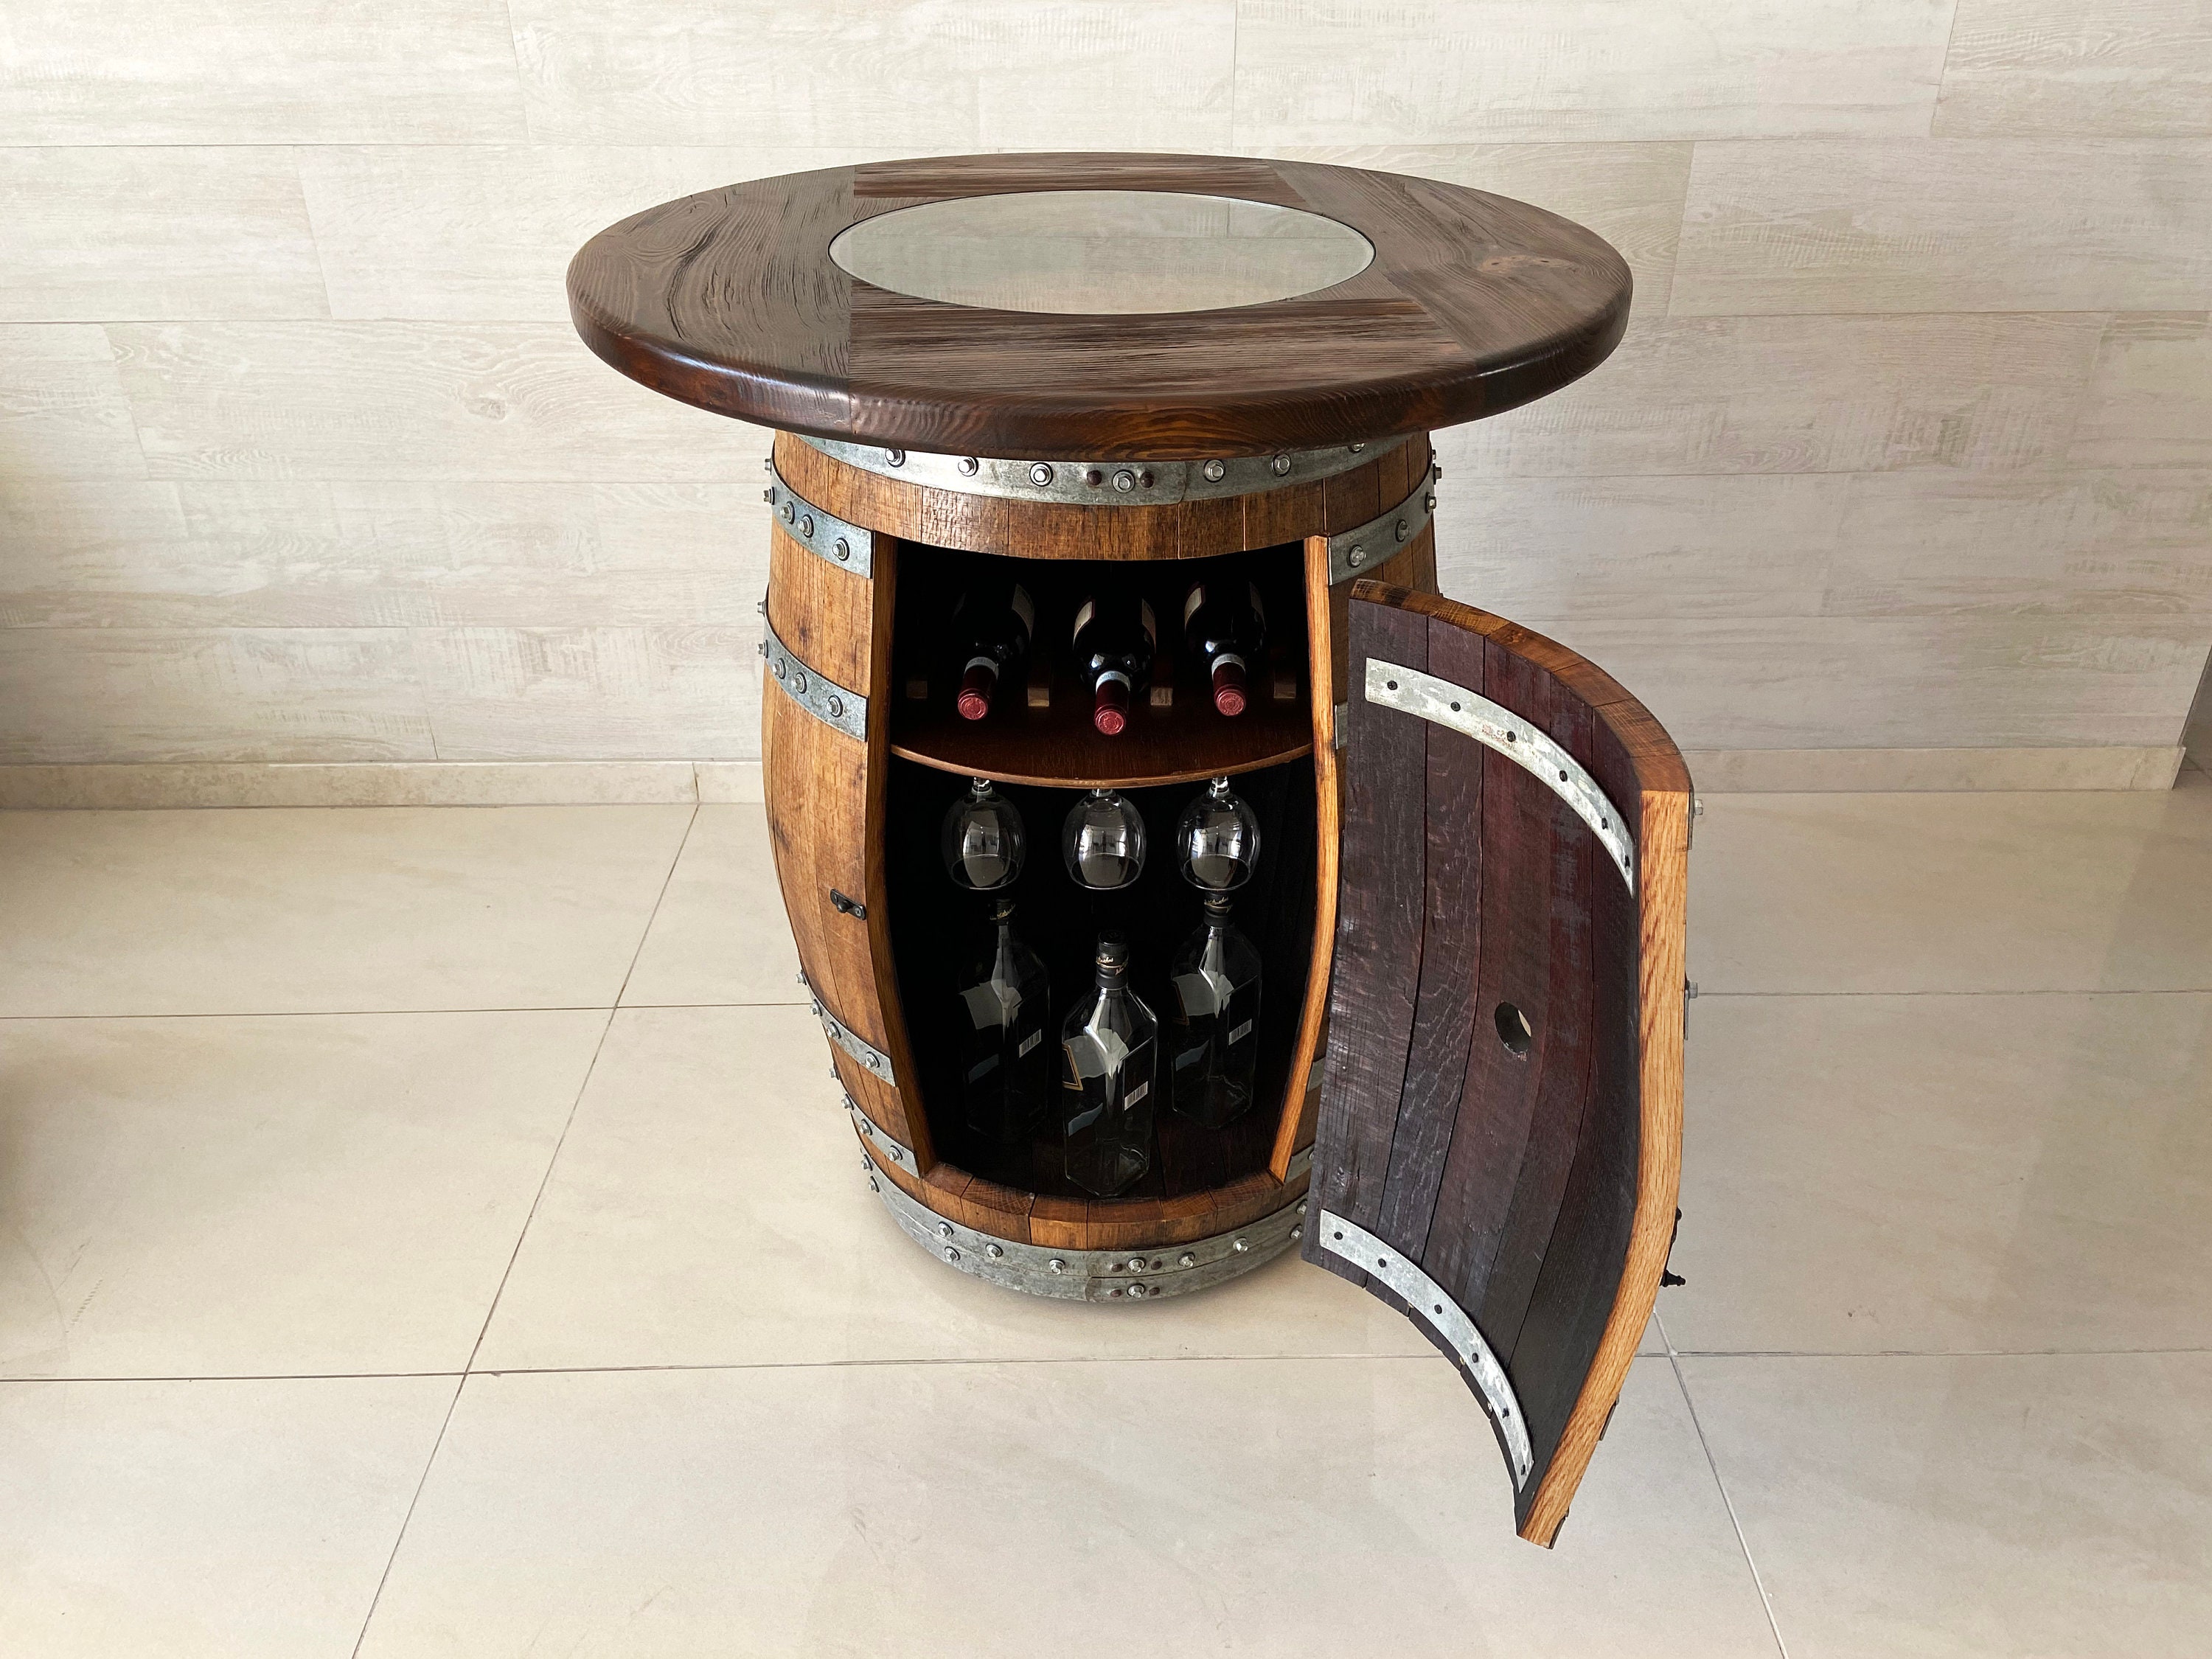 Big Truck Mechanic Garage Gifts for Men Farmhouse Rustic Round Whiskey  Barrel End Table